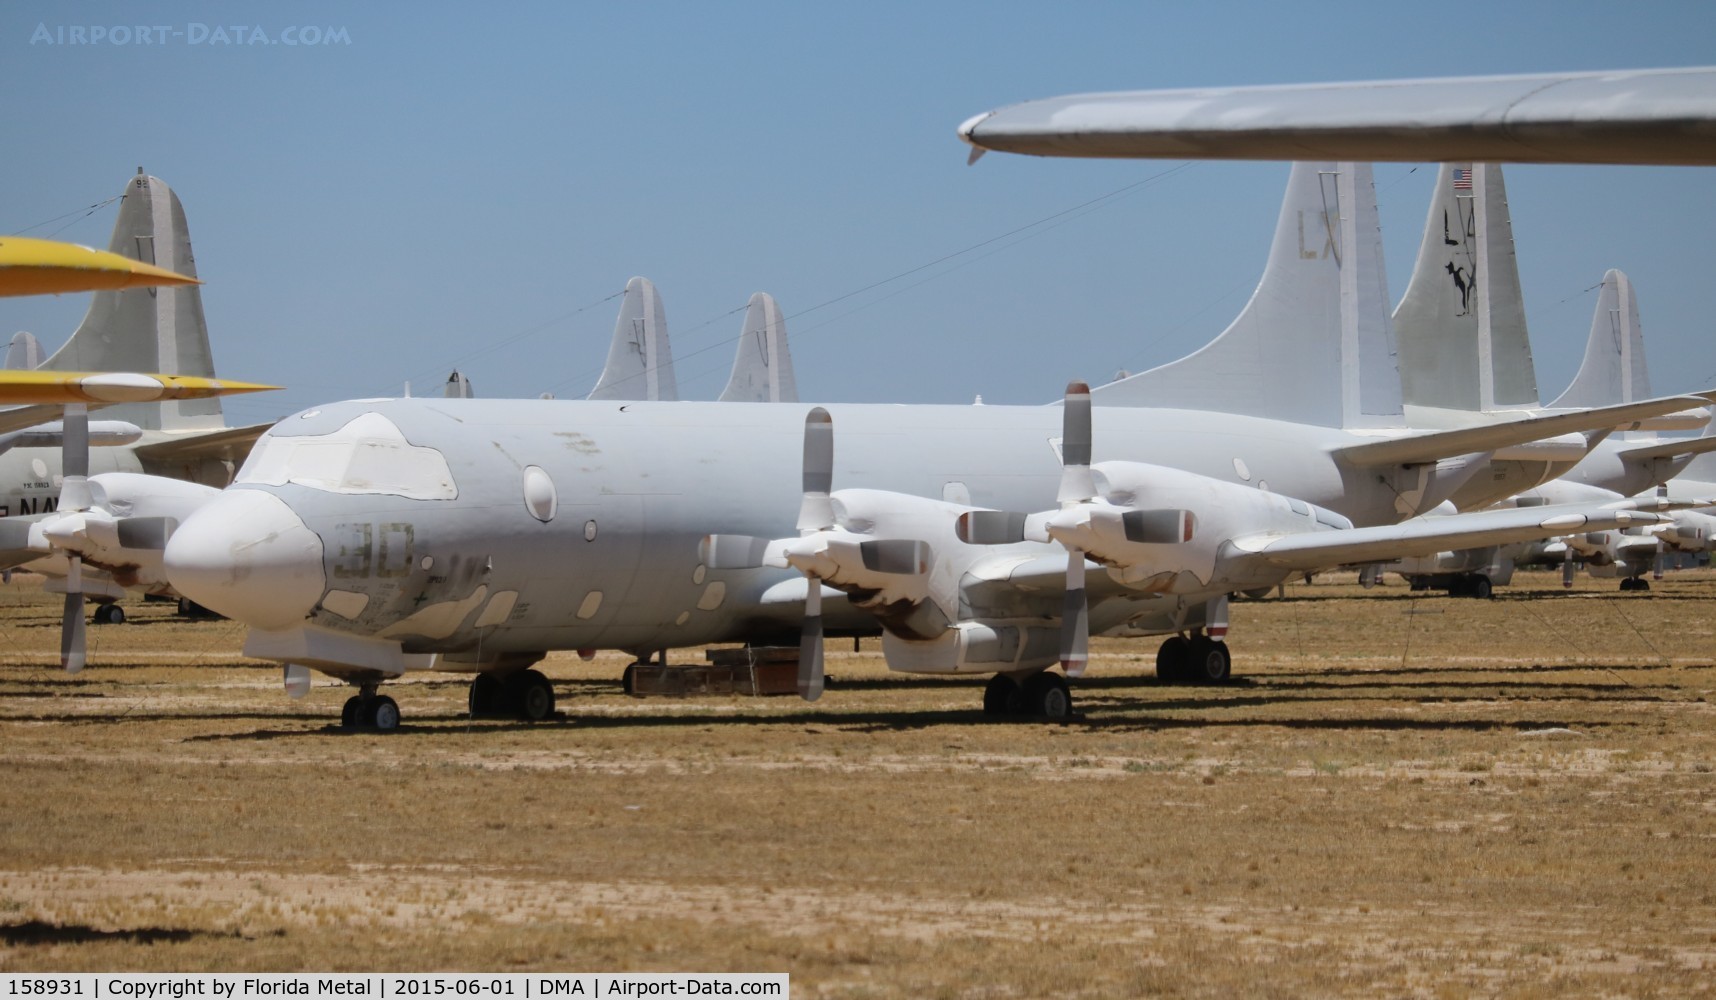 158931, Lockheed P-3C Orion C/N 285A-5603, P-3C Orion